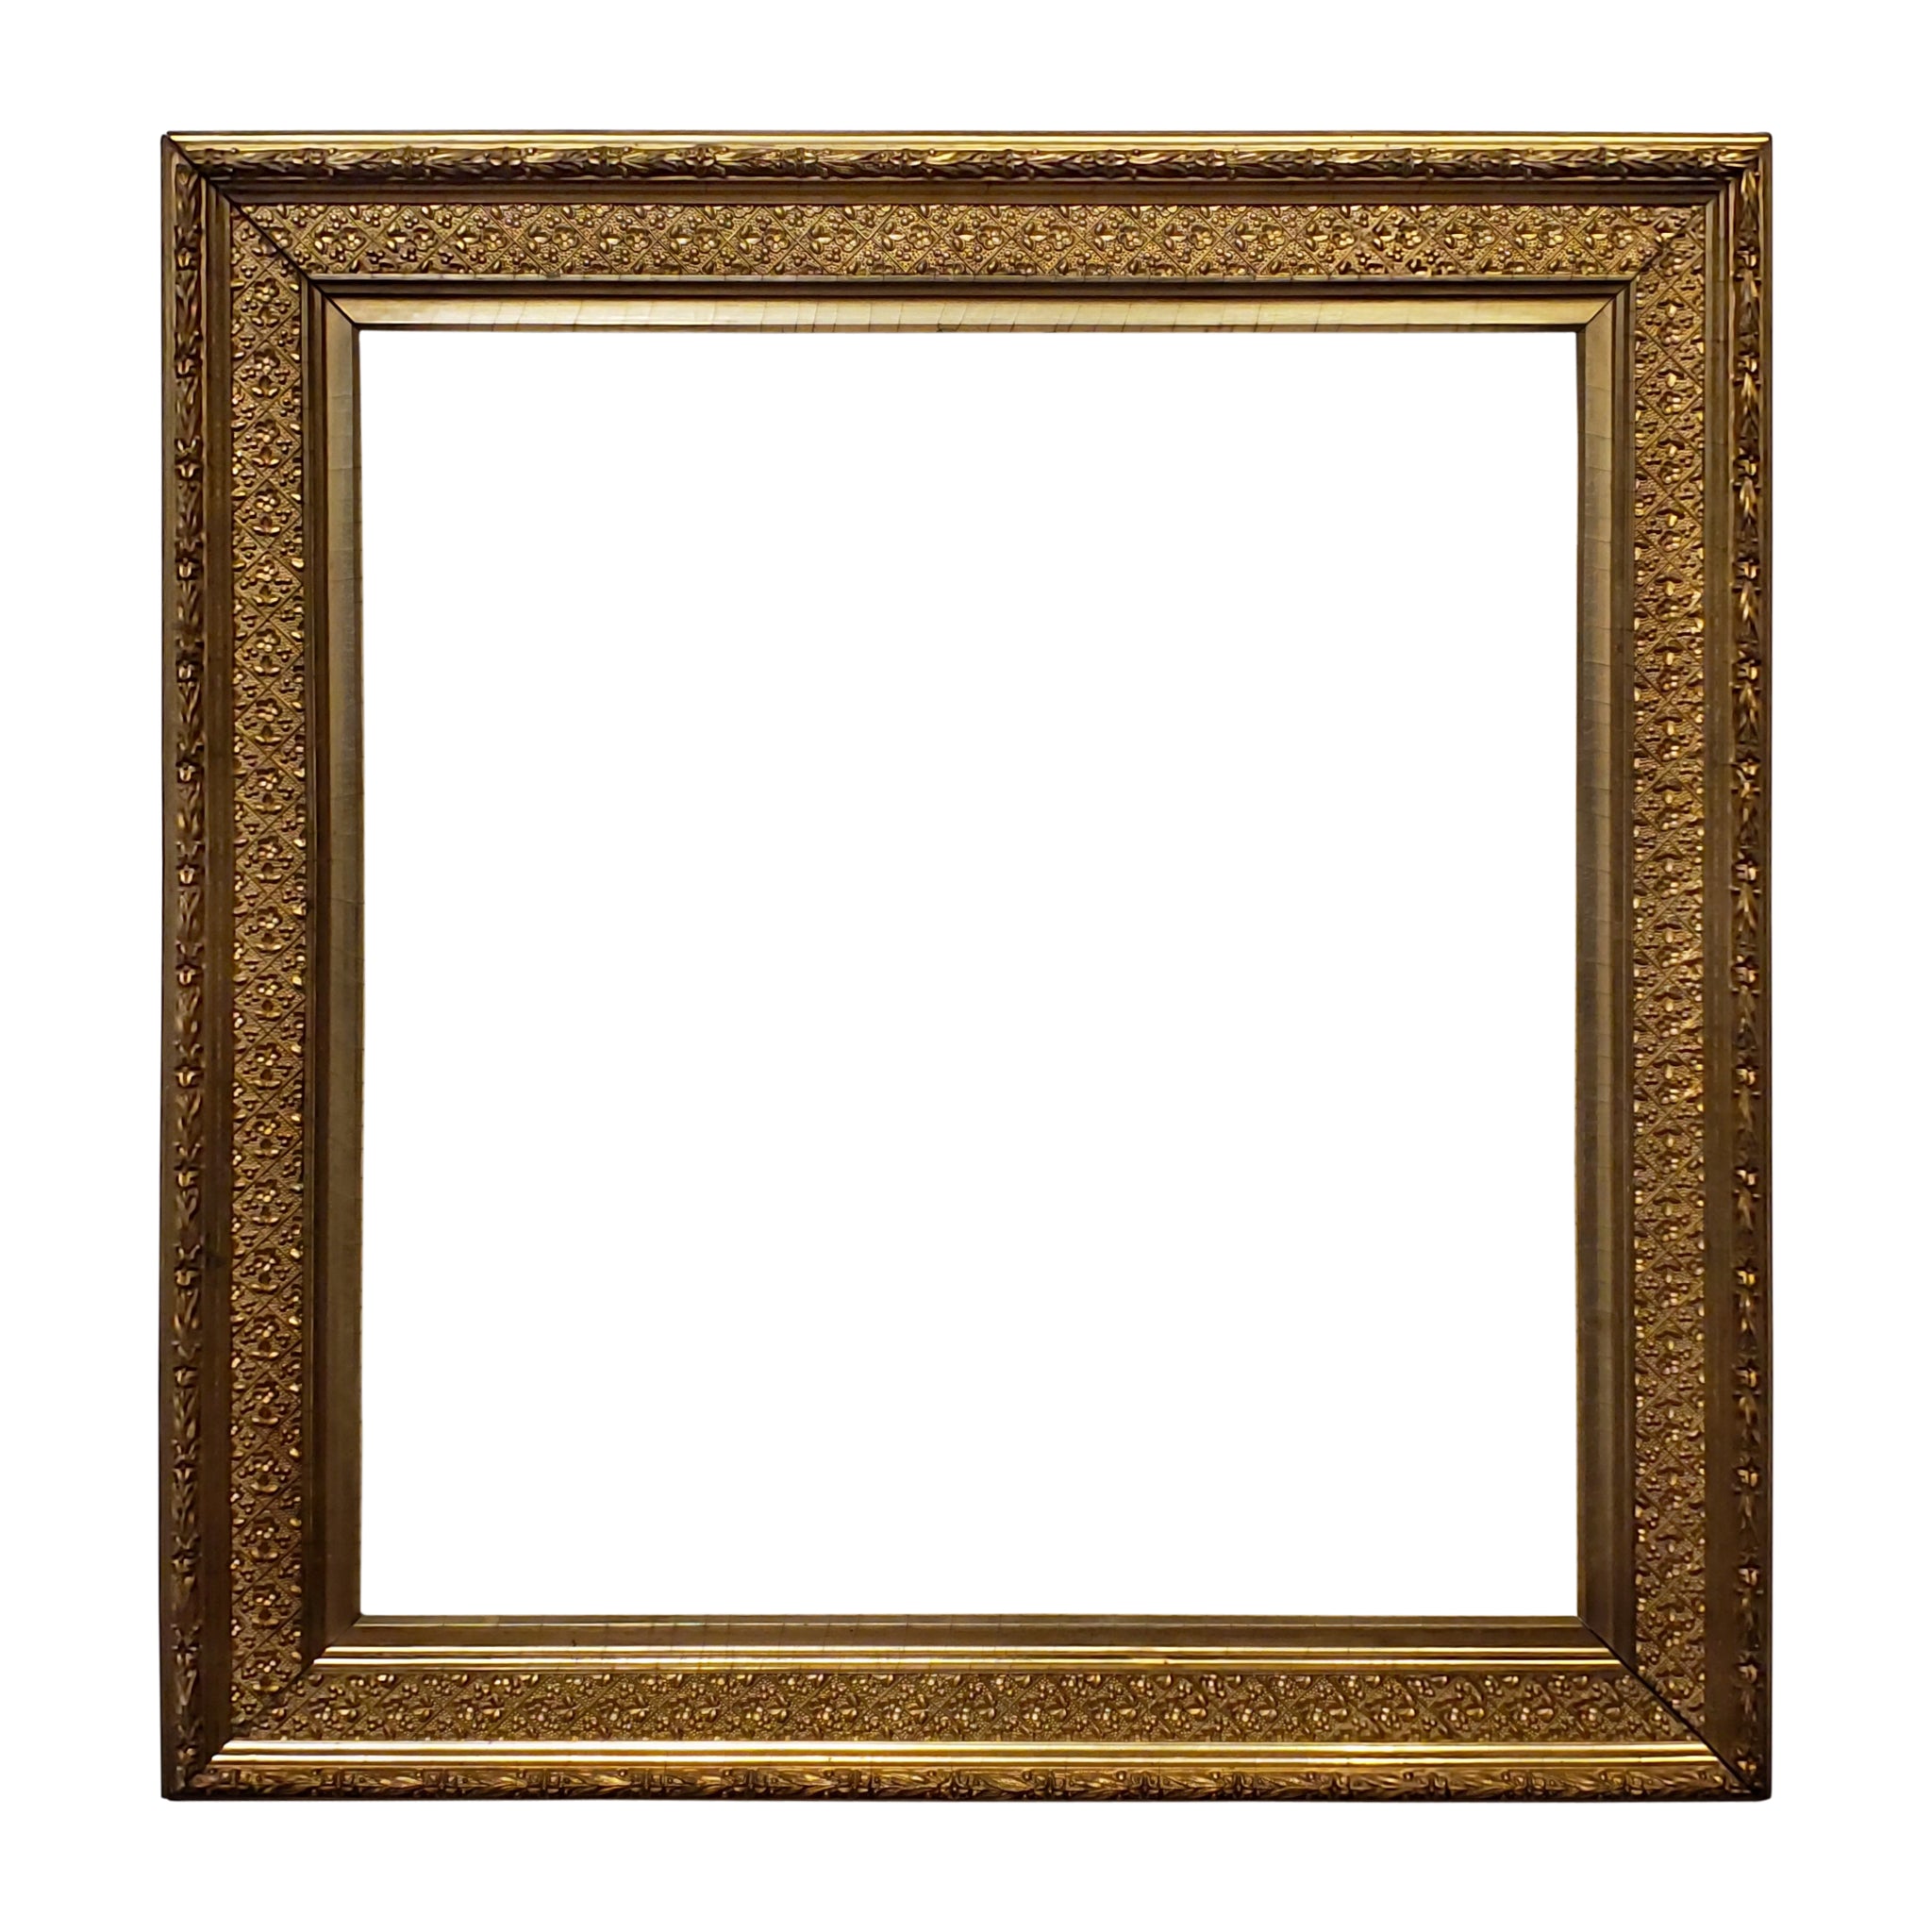 Set of 4 19th Century American Gamboge 19x20 Picture Frames